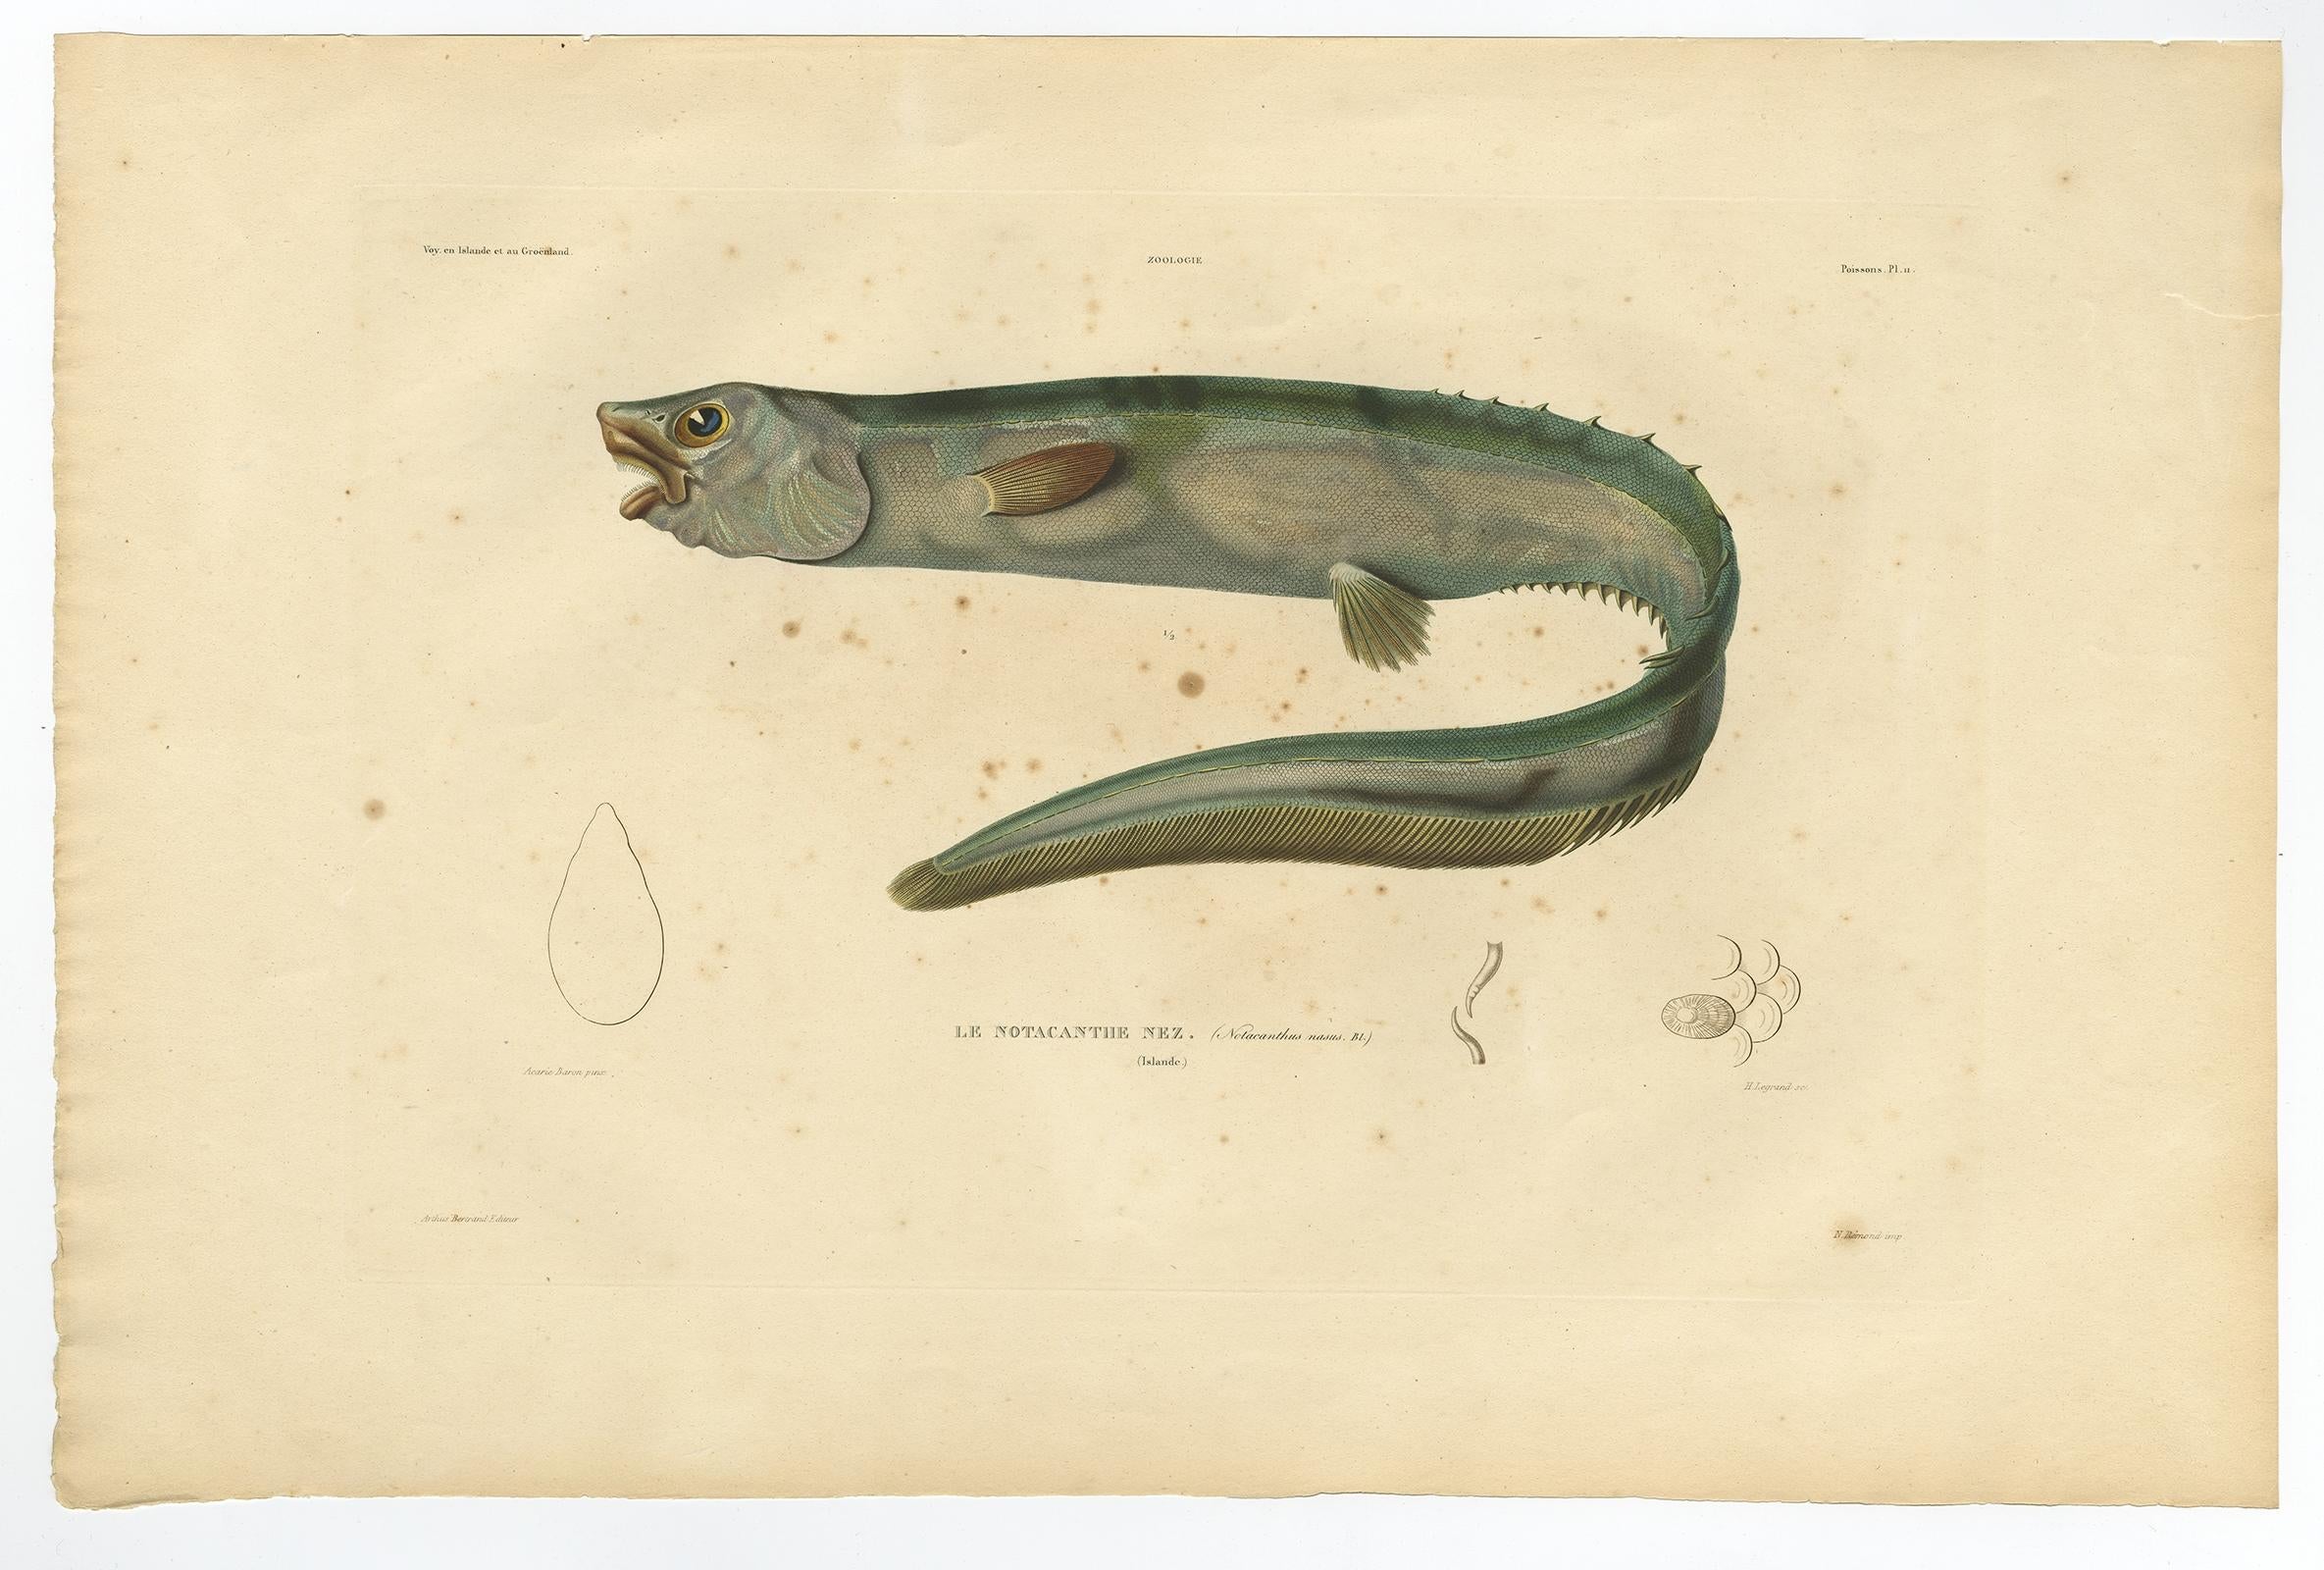 Antique print, titled: 'Poissons Plate 11 - Le Notacanthe Nez (Notacanthus nasus).' - This rare plate shows the snub-nosed spiny eel (Notacanthus chemnitzii). From: 'Voyage en Islande et au Groenland' by M. Paul Gaimard, published in Paris